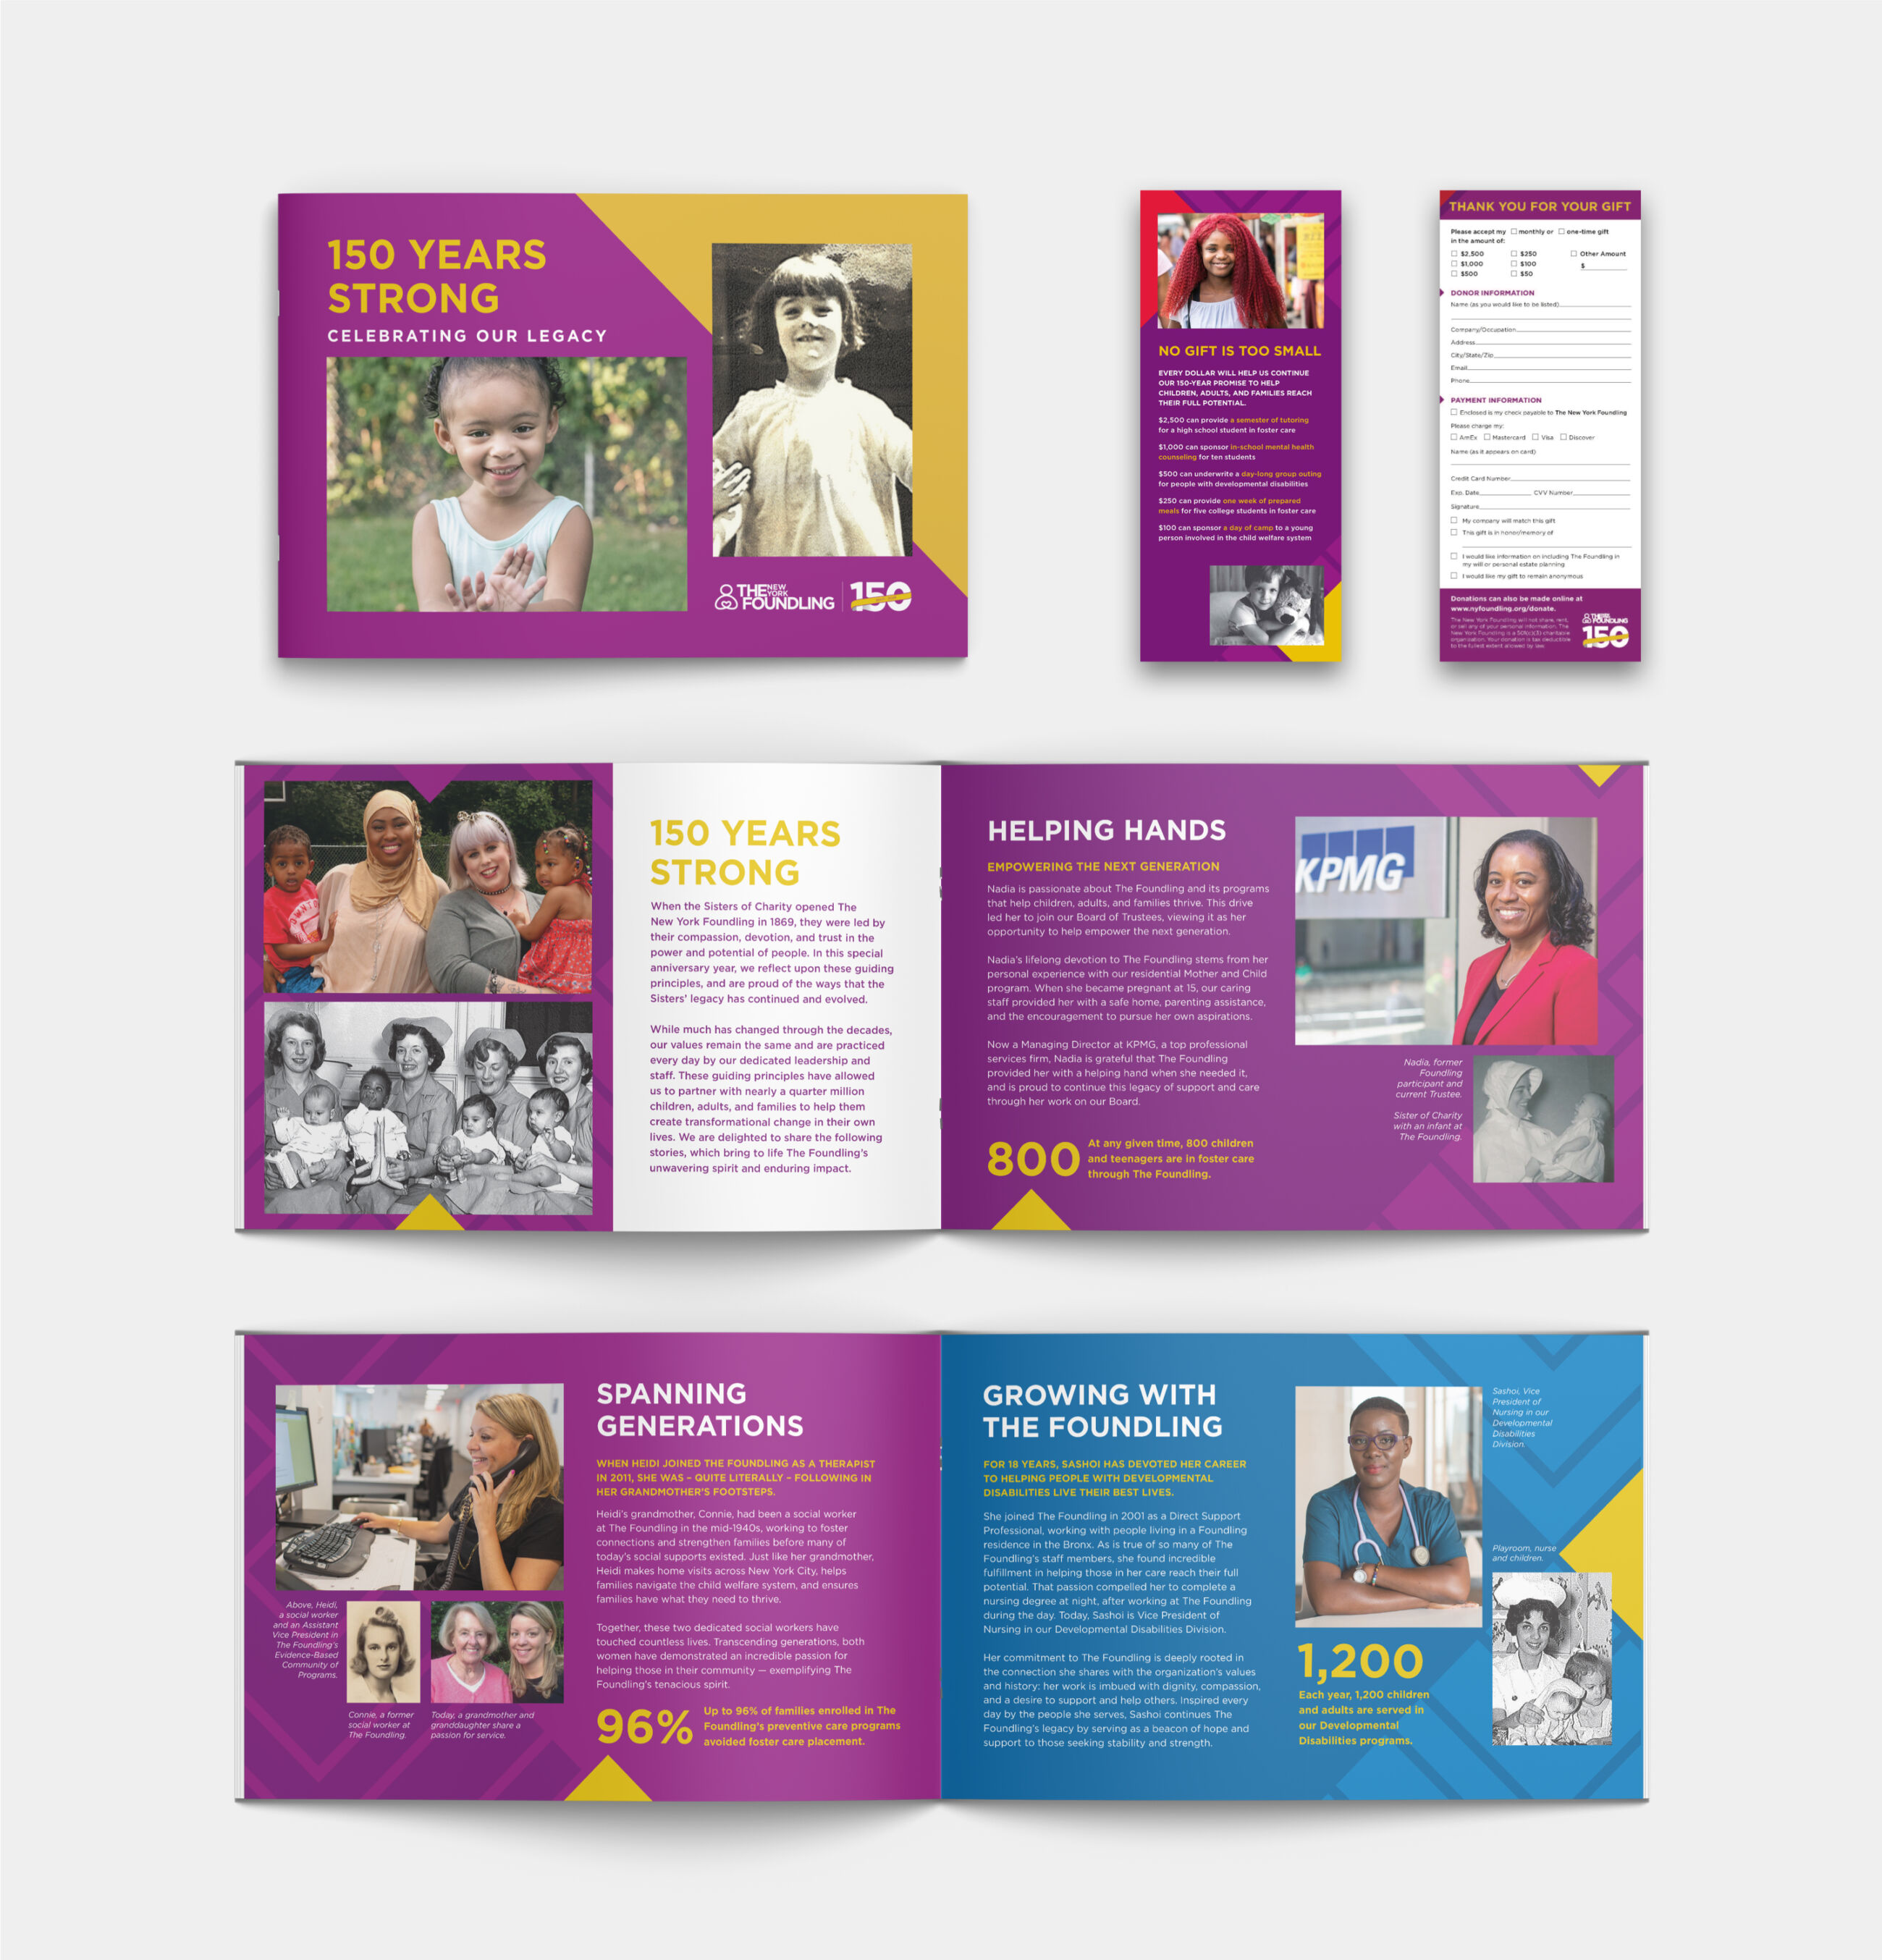 2019 new york foundling appeal booklet 2